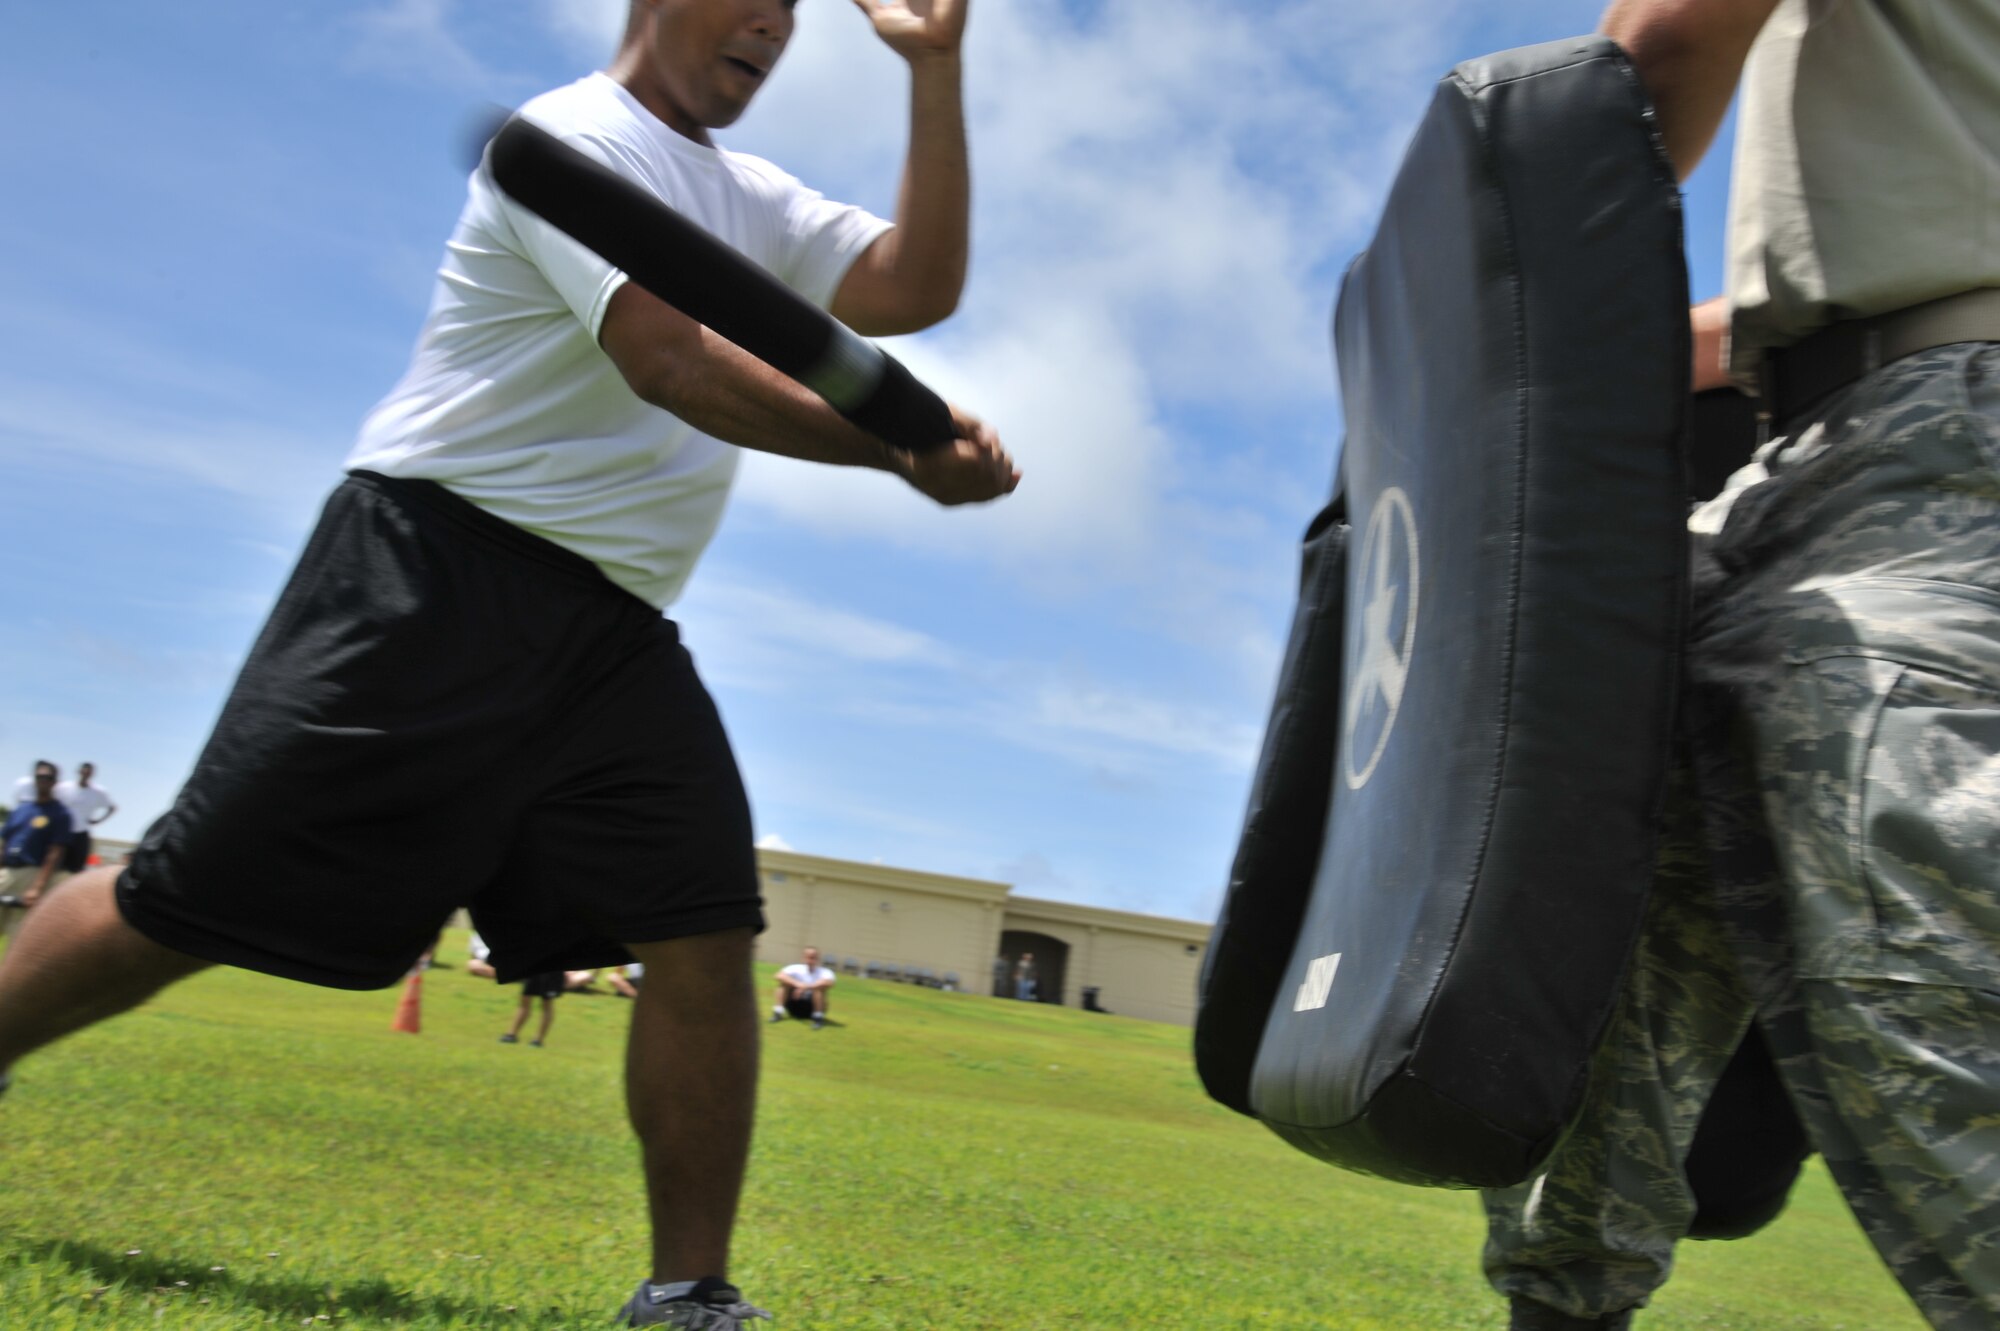 ANDERSEN AIR FORCE BASE, Guam-Department of Defense police officer cadets train with Oleoresin Capsicum Spray through a five-station obstacle course for qualification here July 27. After completing the course, the recruits will become DoD police officers for Andersen AFB and security guards for Naval Base Guam. This training is required so officers get first-hand experience using the weapon and can still perform their duties if they are sprayed during an incident. The academy is nine weeks for DoD police officer’s and five weeks for the security guards. The current class consists of 18 police officers and two security guards. Upon completion, 17 DoD police officers will be assigned to Andersen. This program was postured to enhance the security of the installation and ensure qualified personnel are manning the gates and patrols. (U.S. Air Force Photo by Staff Sgt. Alexandre Montes/RELEASED) 